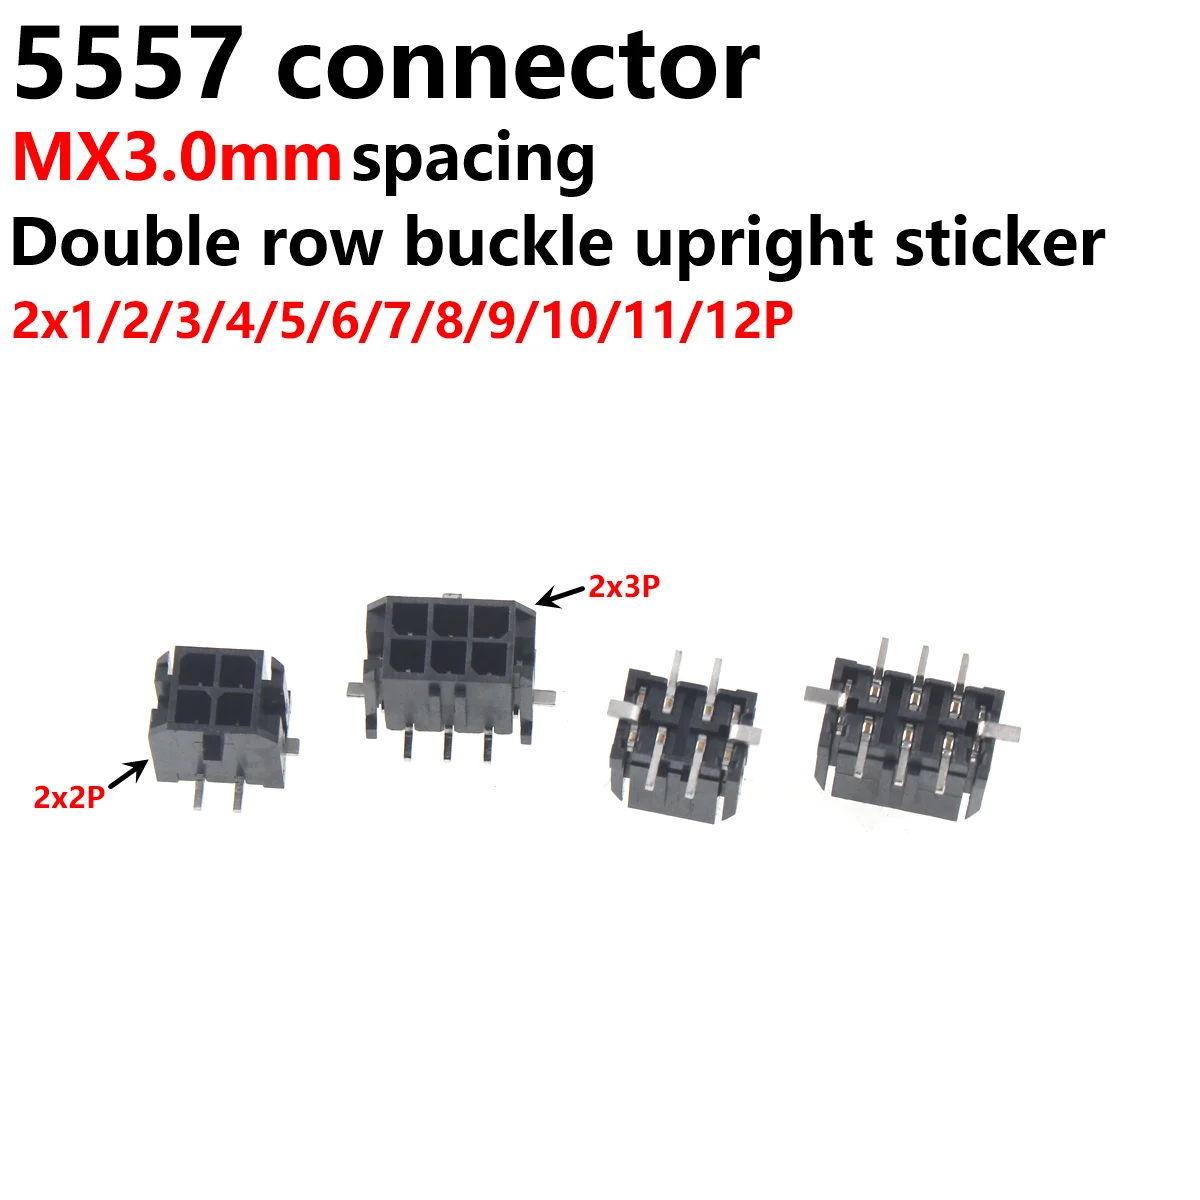 10pcs Micro-fit MX3.0 3.0mm Connector Double Row SMT SMD Type 2P 4P 6P 8P 10 12 14 24pin 43045 receptacle Socket usb 3 1 type c connector 12pin 24pin female male socket receptacle adapter to solder wire